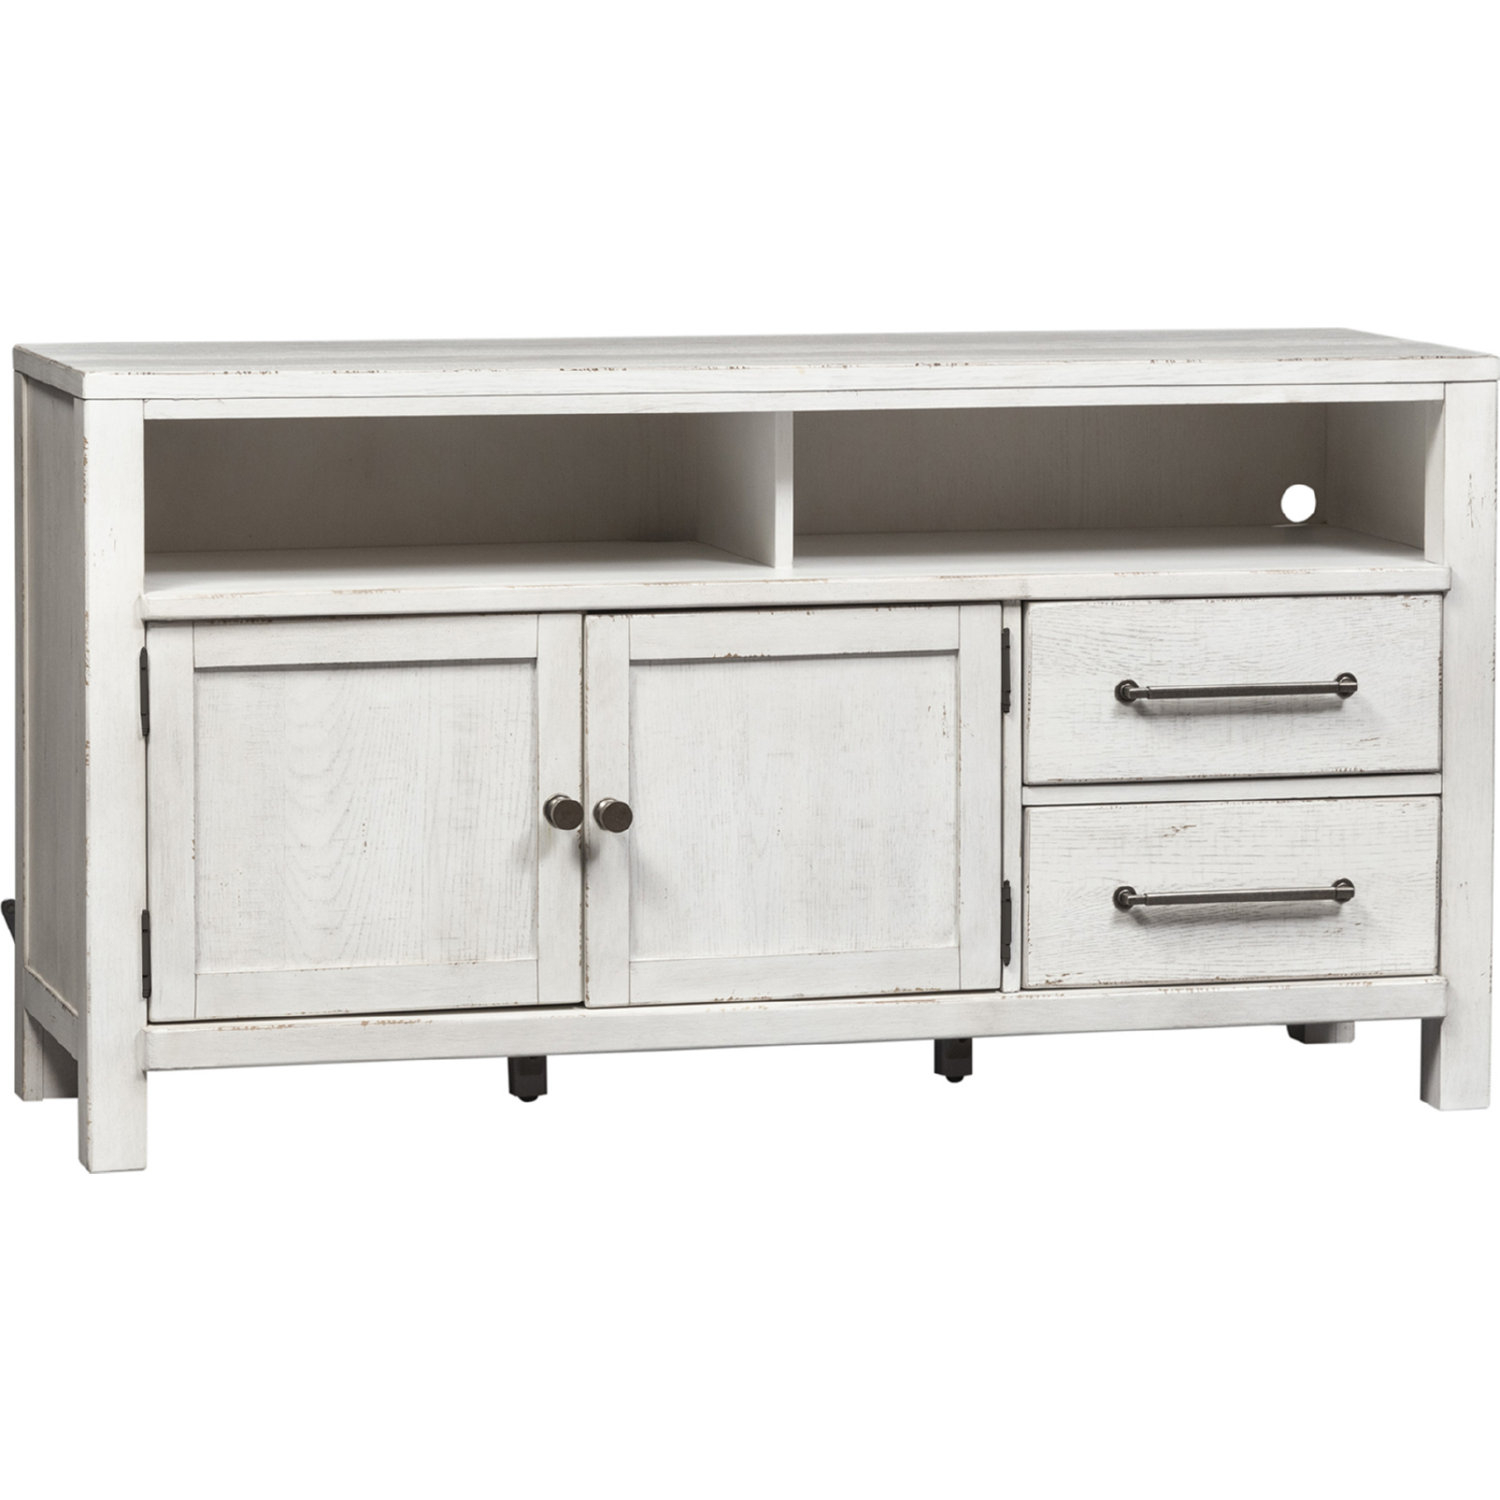 Liberty 406WTV56 Modern Farmhouse 56" TV Stand Console in